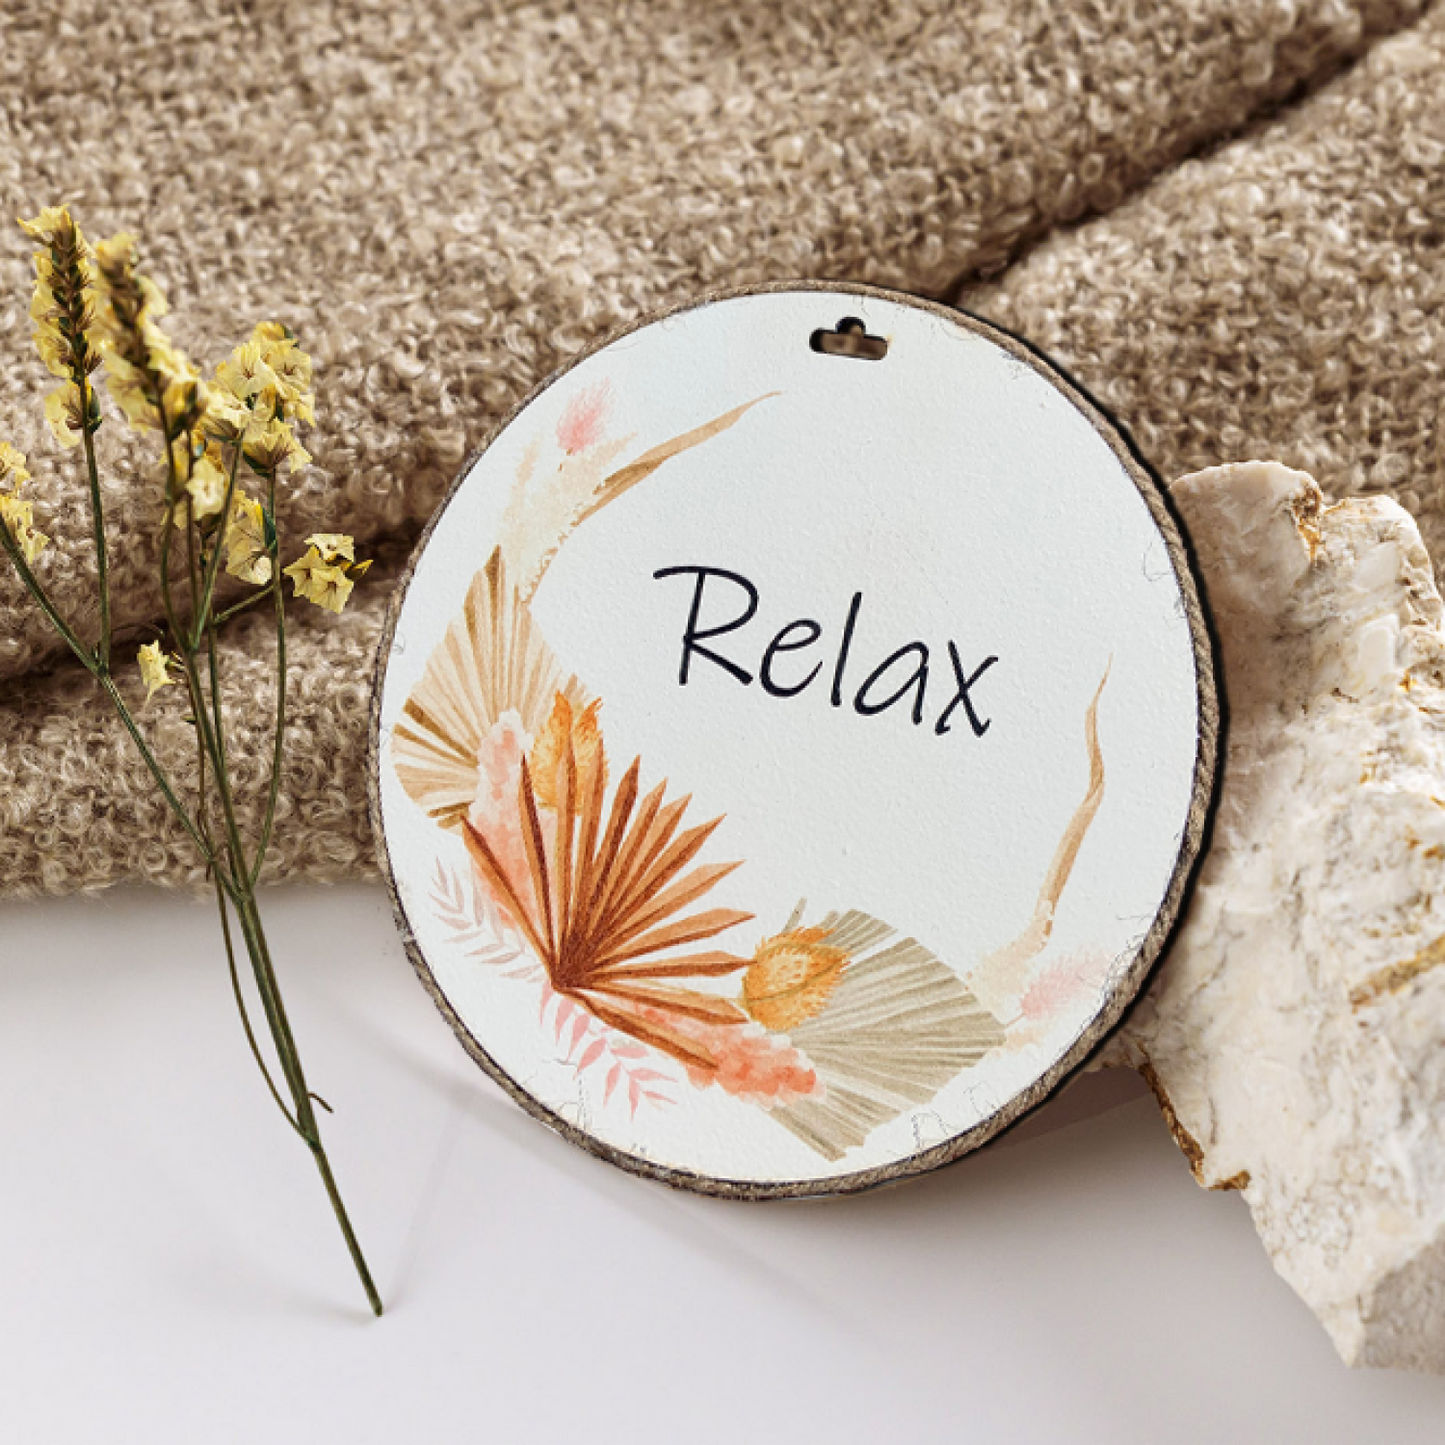 Relax Wood Print Colorful Wall or Door Hanging